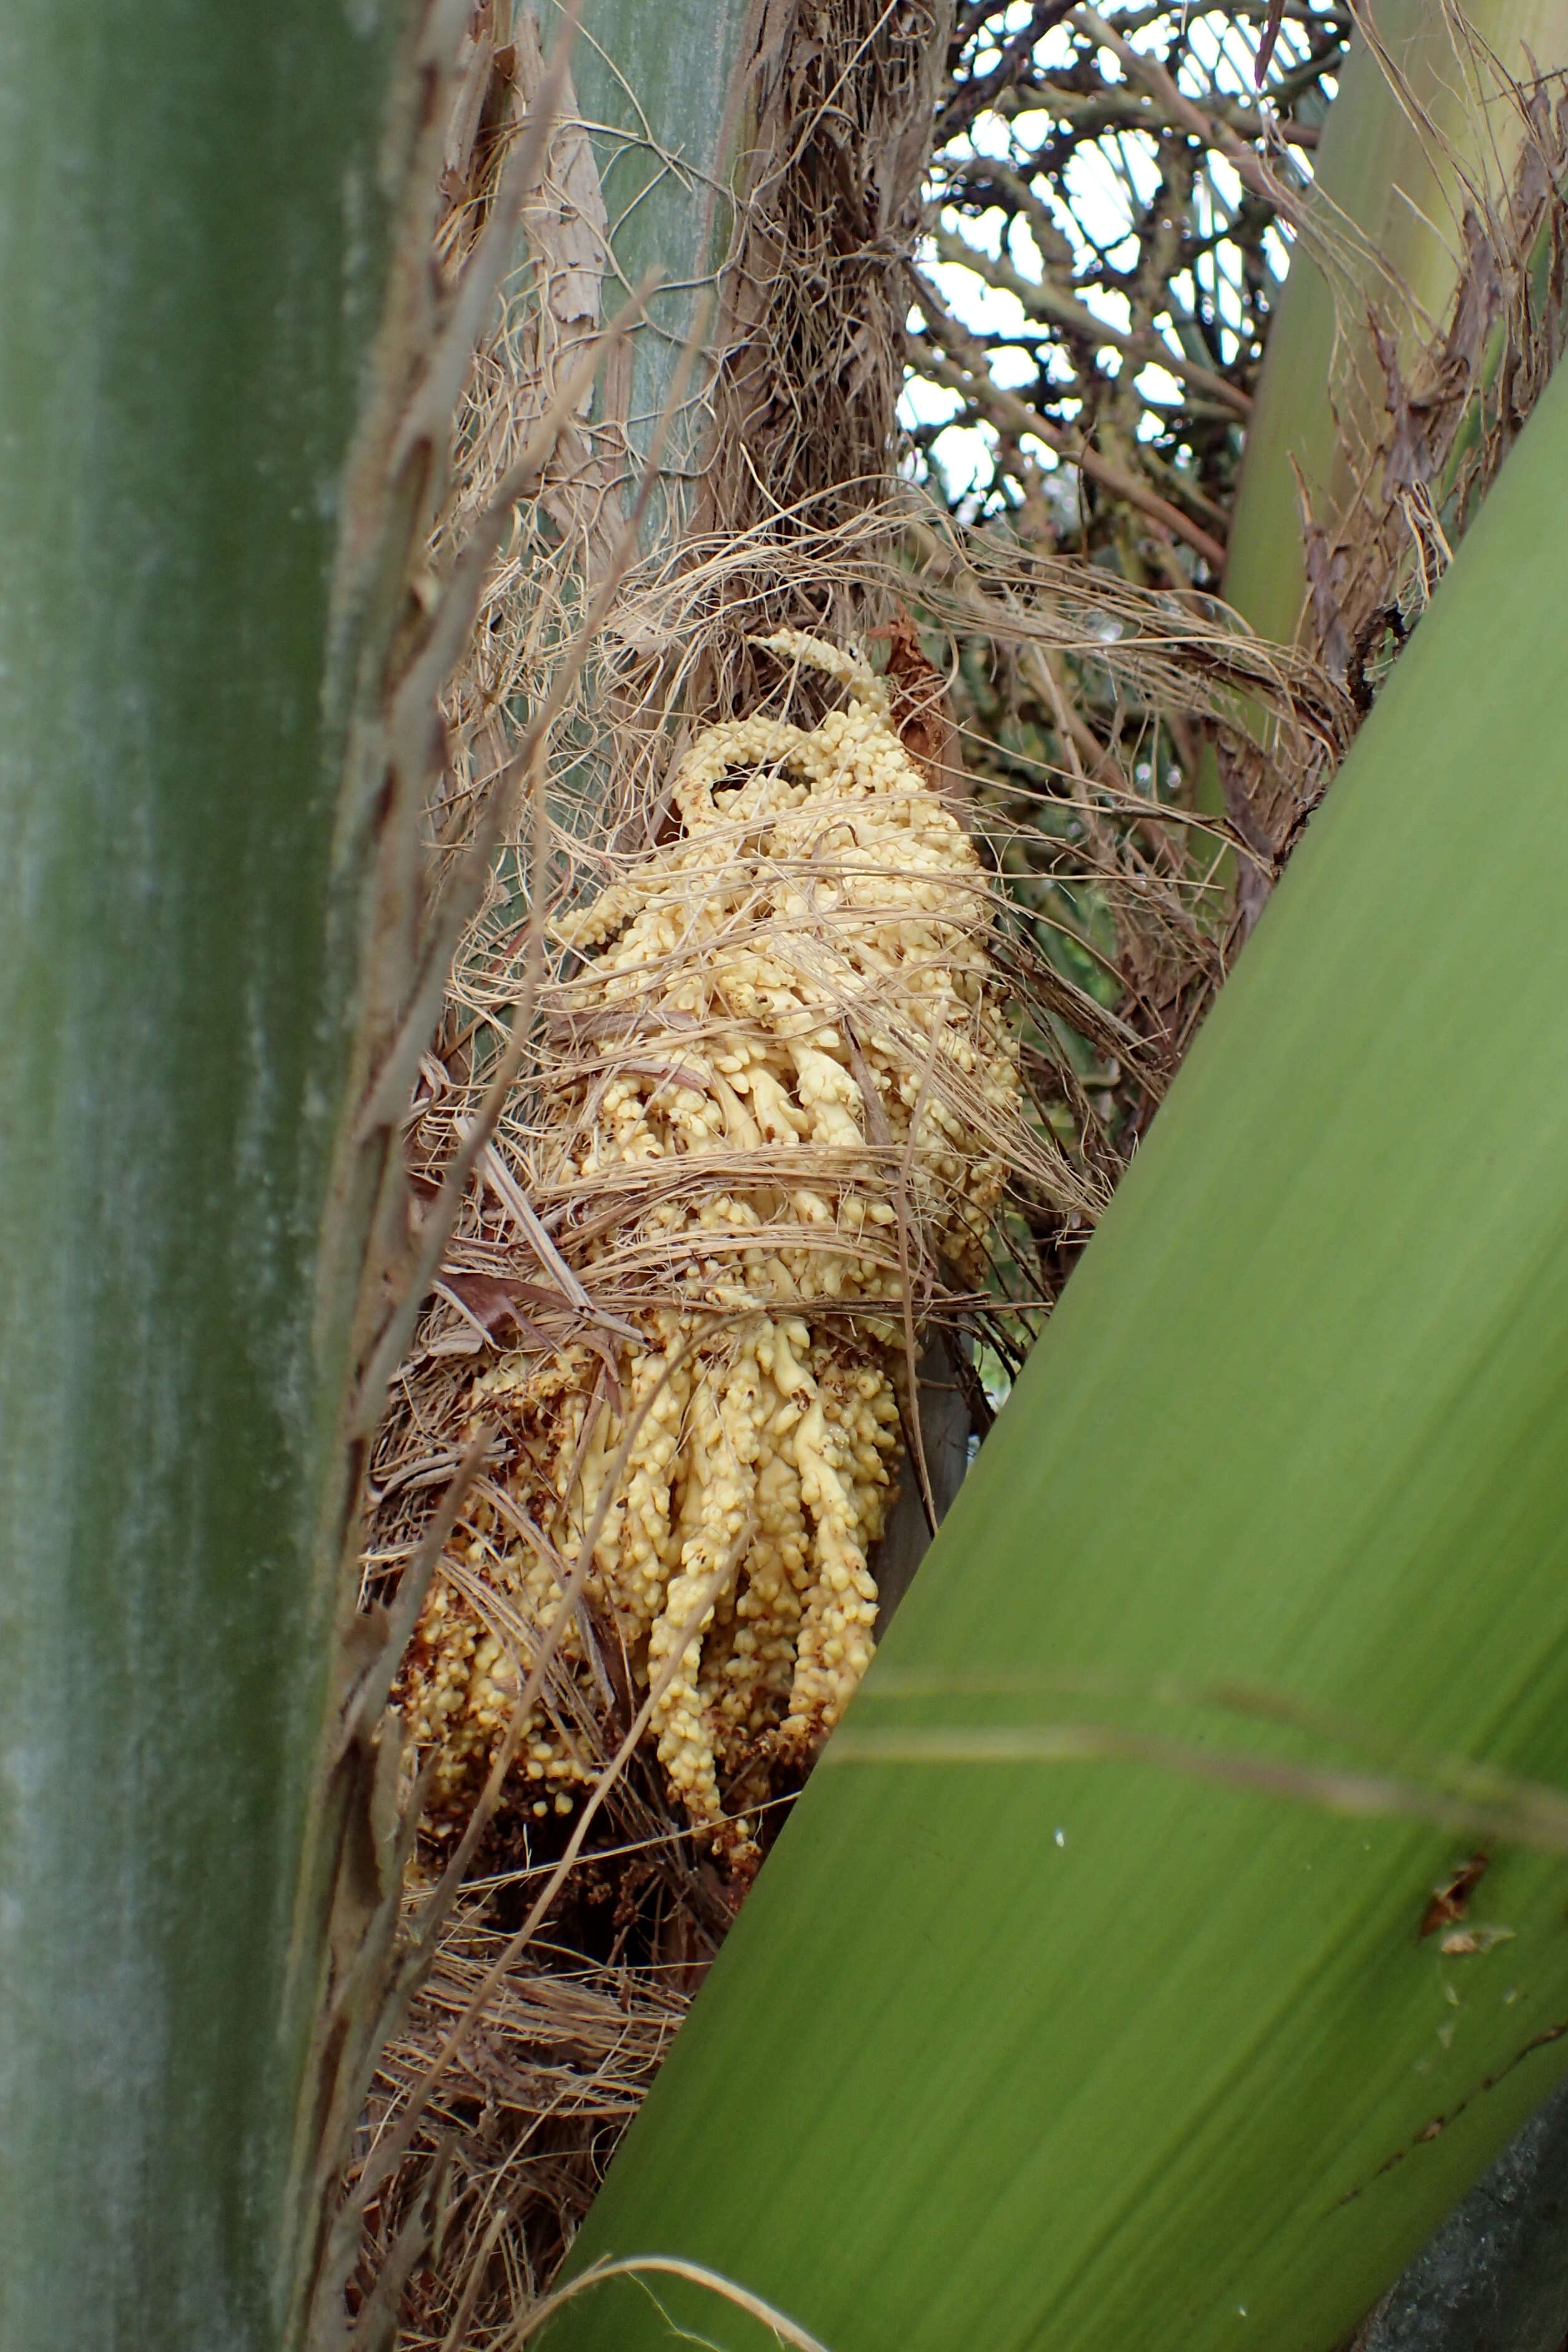 Image of South American jelly palm